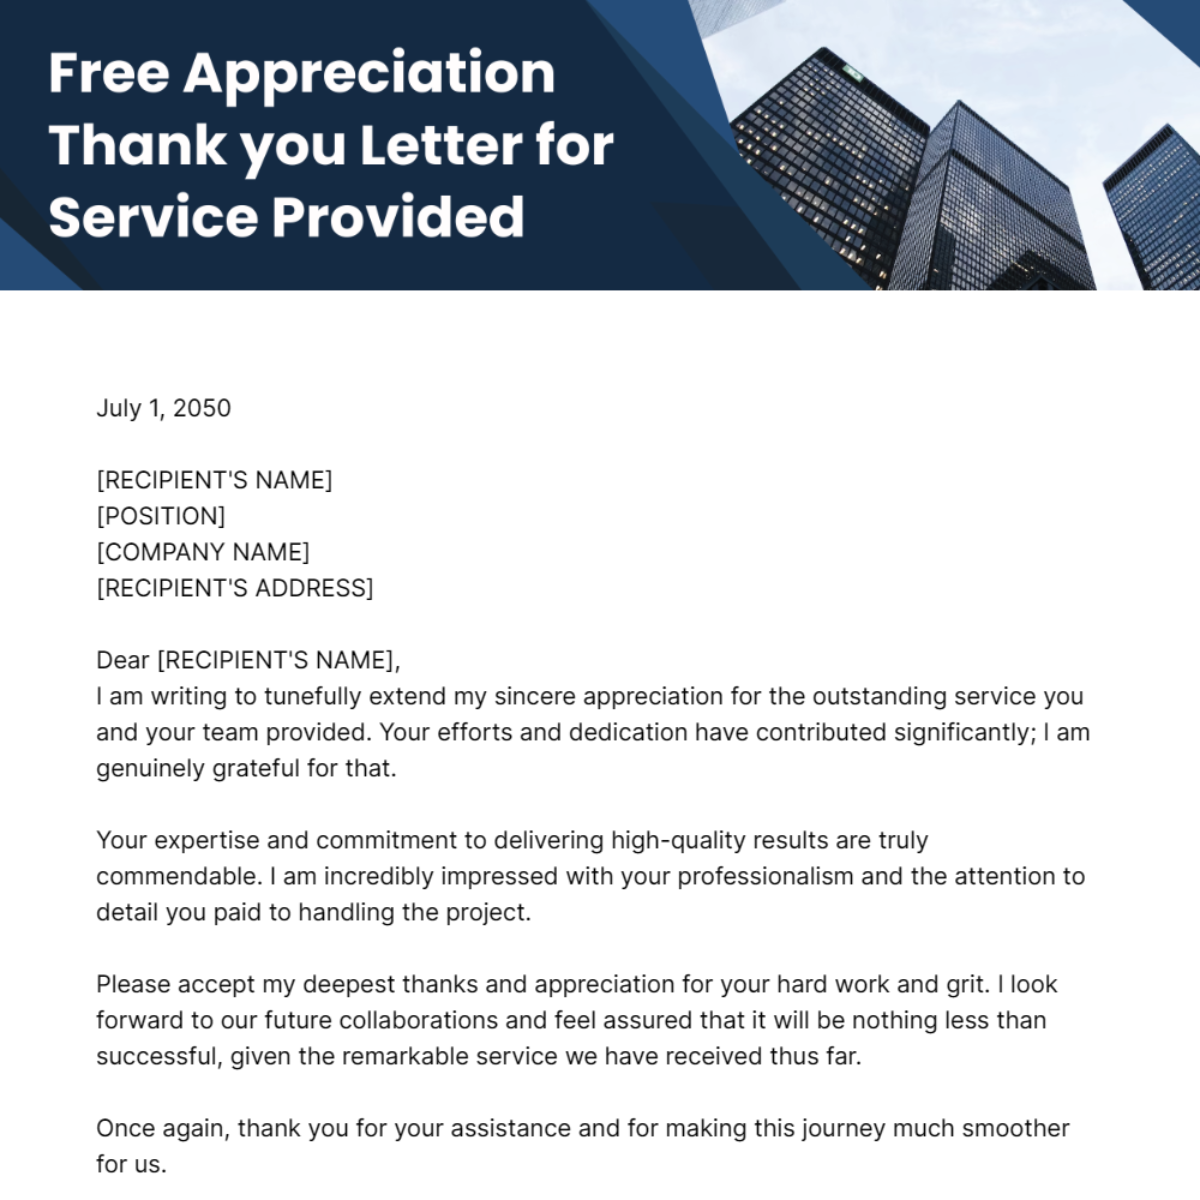 Appreciation Thank you Letter for Service Provided Template